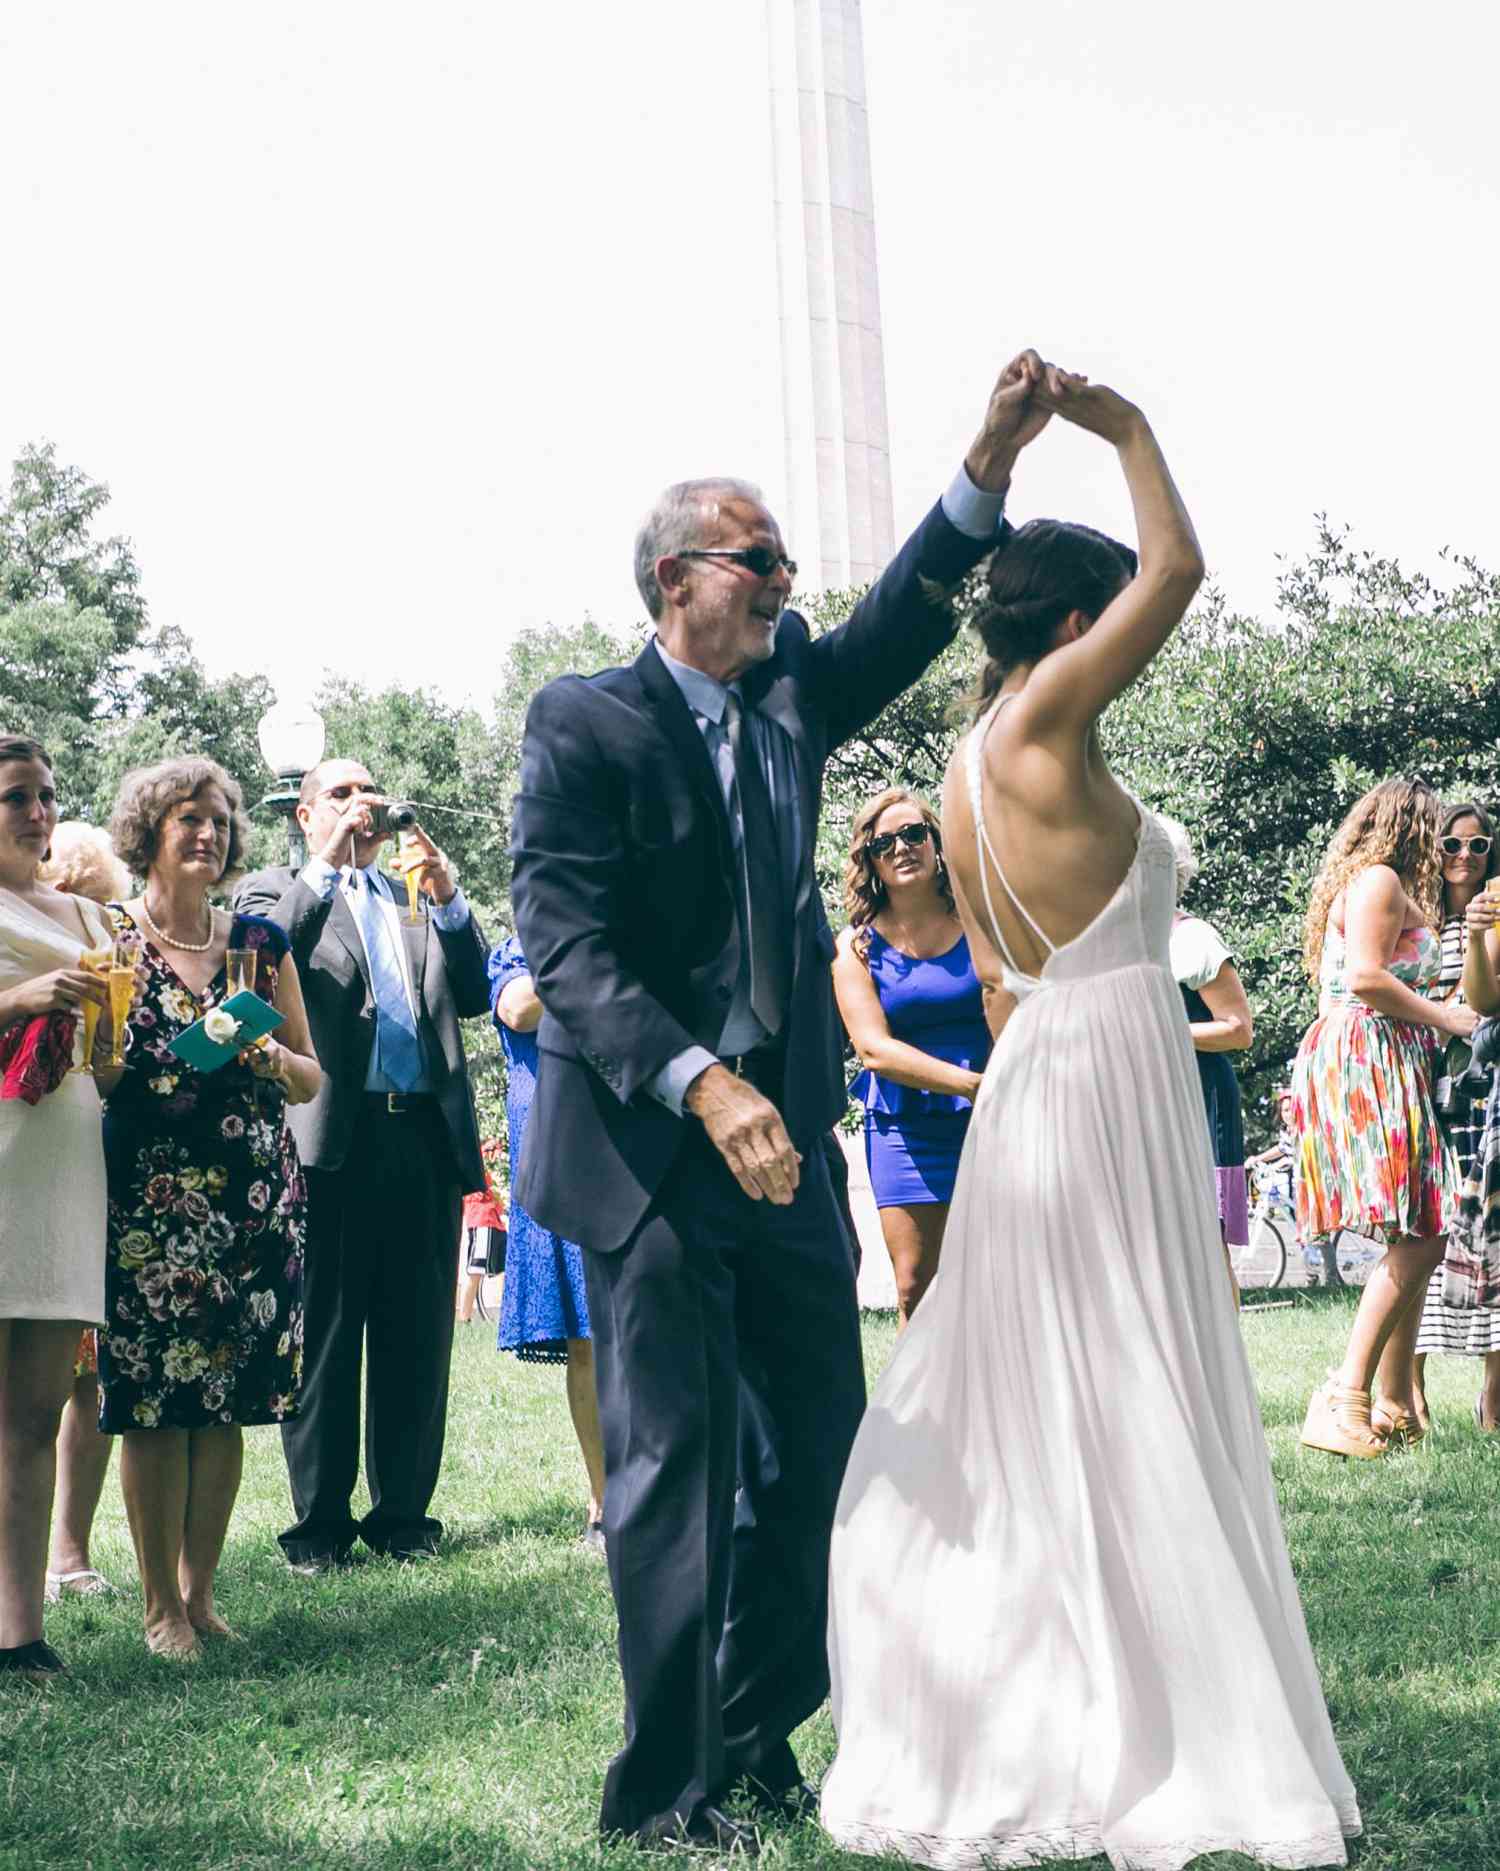 The Father-Daughter Dance